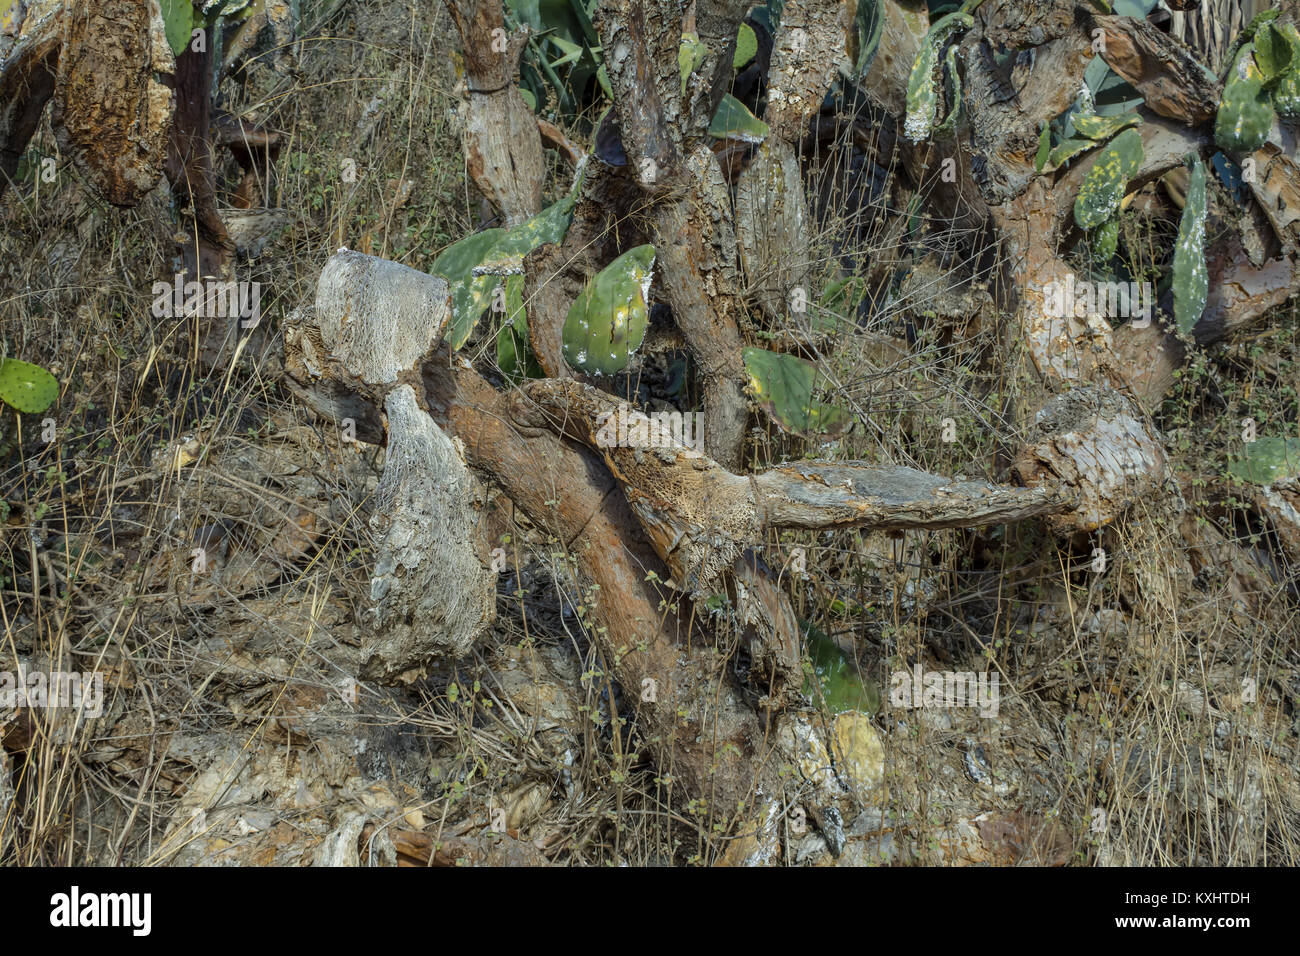 Opuntia ficus indica, Prickly Pear Plant Devastated by an infection in Andalusia Spain December 2017 Stock Photo